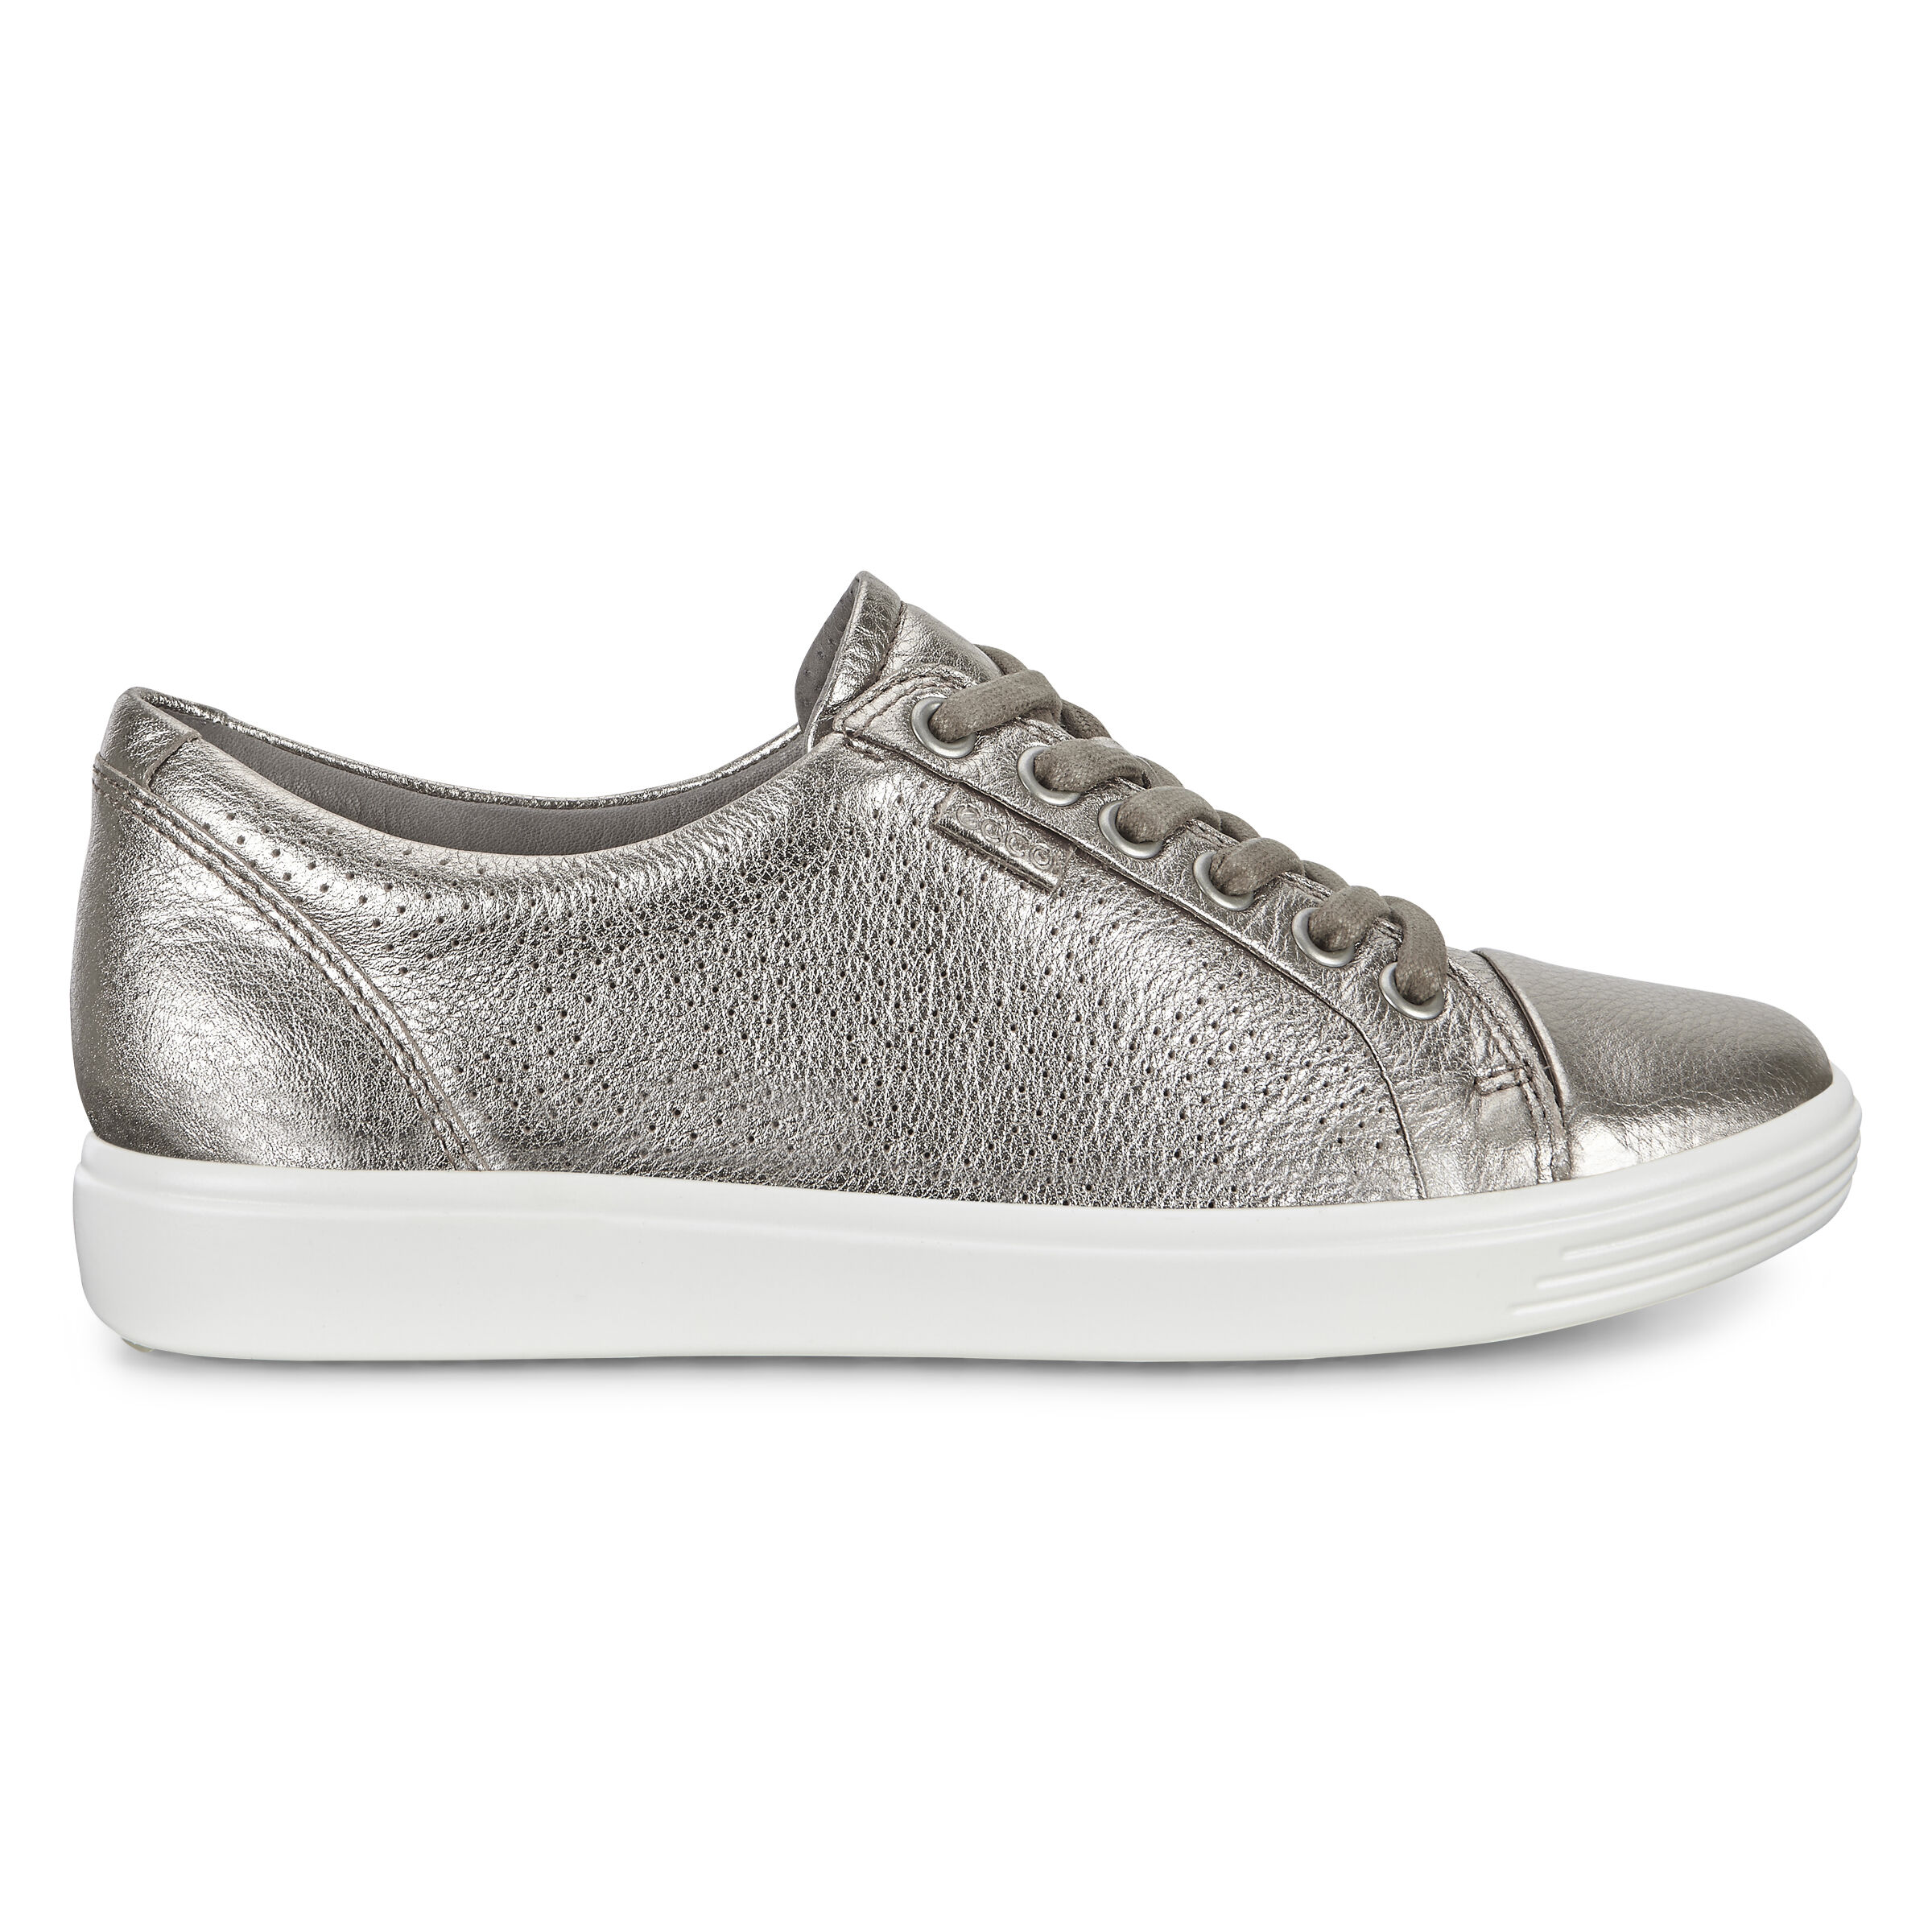 UPC 809704479286 product image for ECCO Womens Soft 7 Perf Tie Shoes size 4 Warm Grey | upcitemdb.com